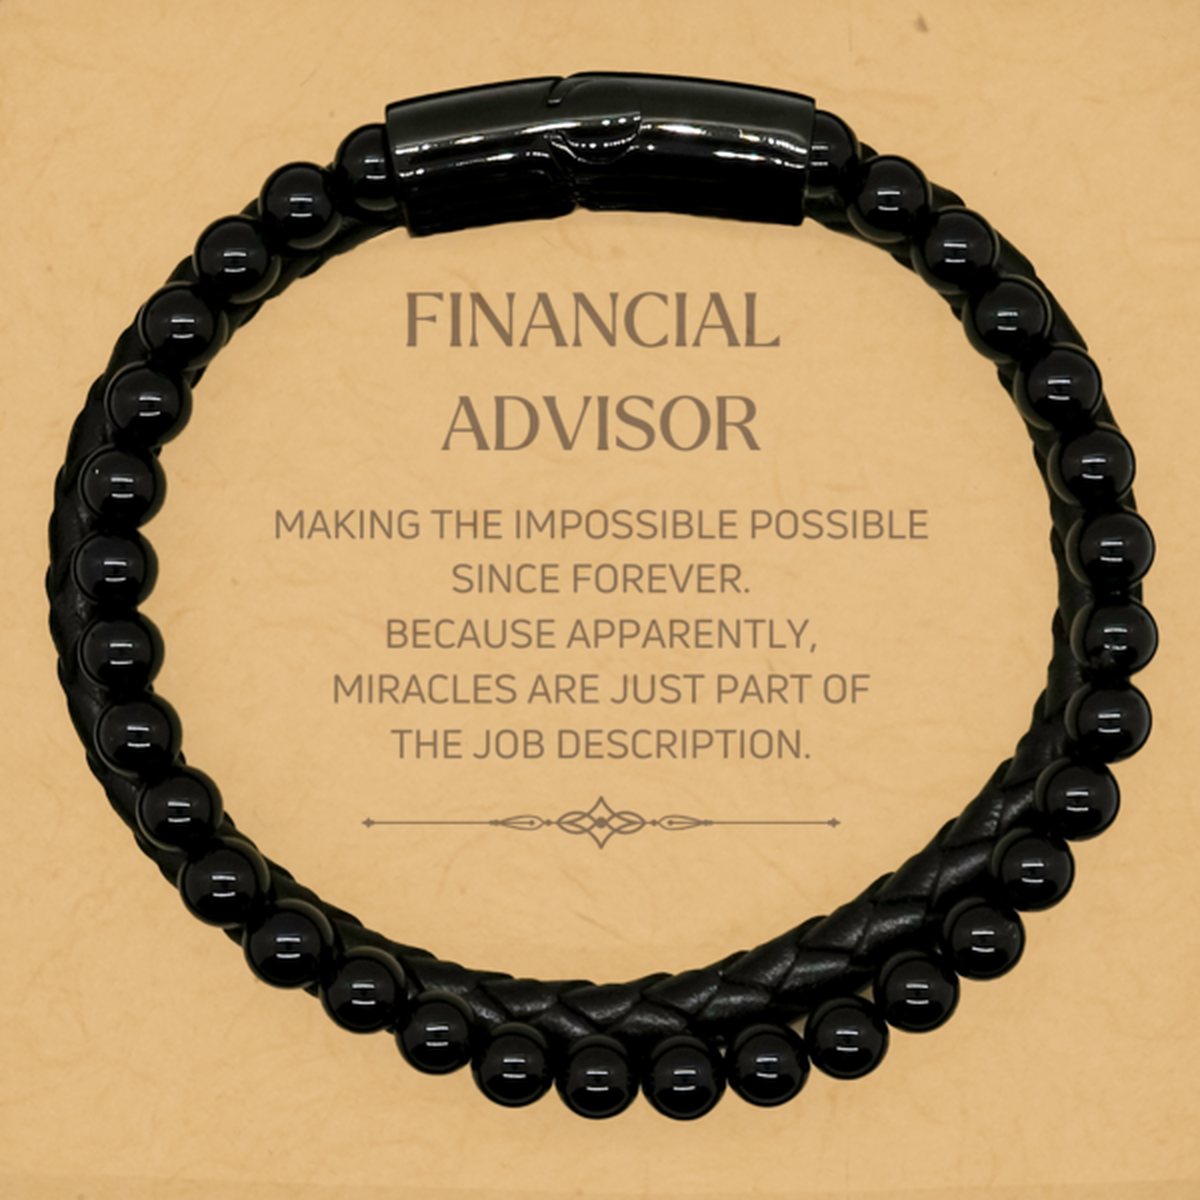 Funny Financial Advisor Gifts, Miracles are just part of the job description, Inspirational Birthday Stone Leather Bracelets For Financial Advisor, Men, Women, Coworkers, Friends, Boss